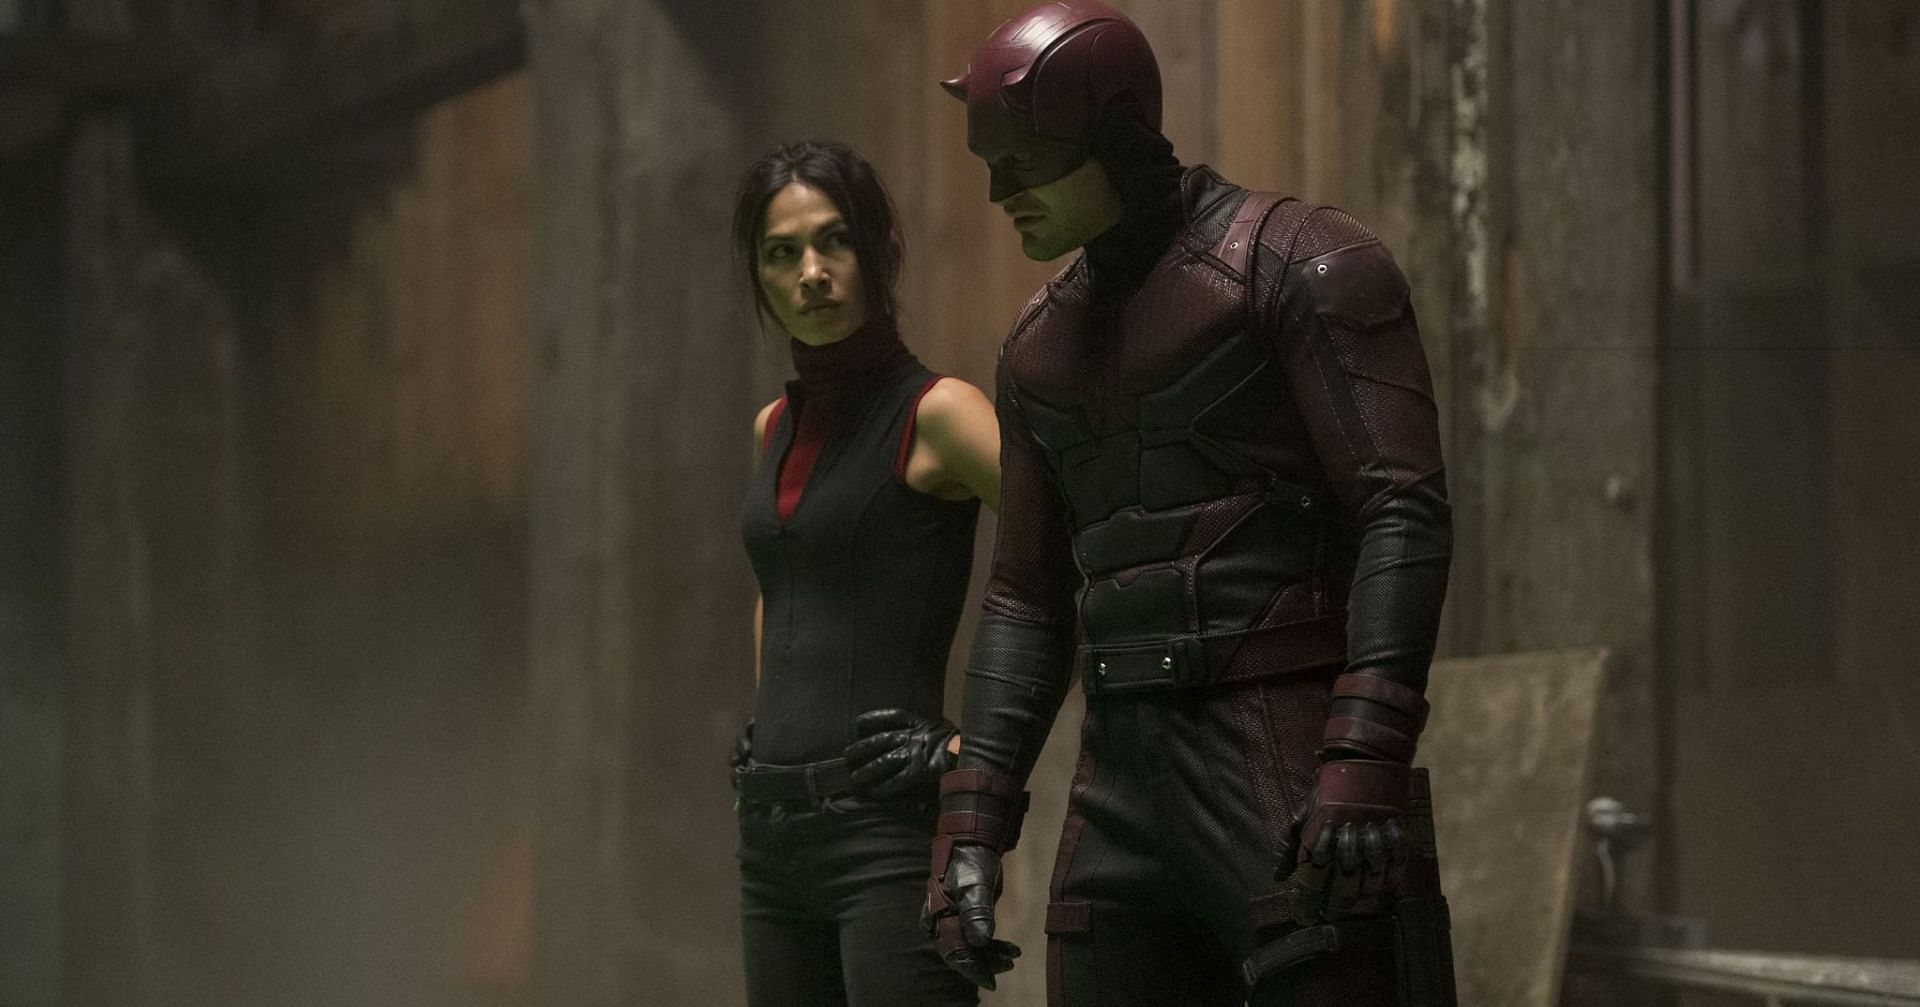 Chris Brewster, stunt double for Netflix&#039;s Daredevil, voices criticism over Marvel Studios&#039; decision to exclude original crew members from the Disney+ reboot (Image via Netflix)